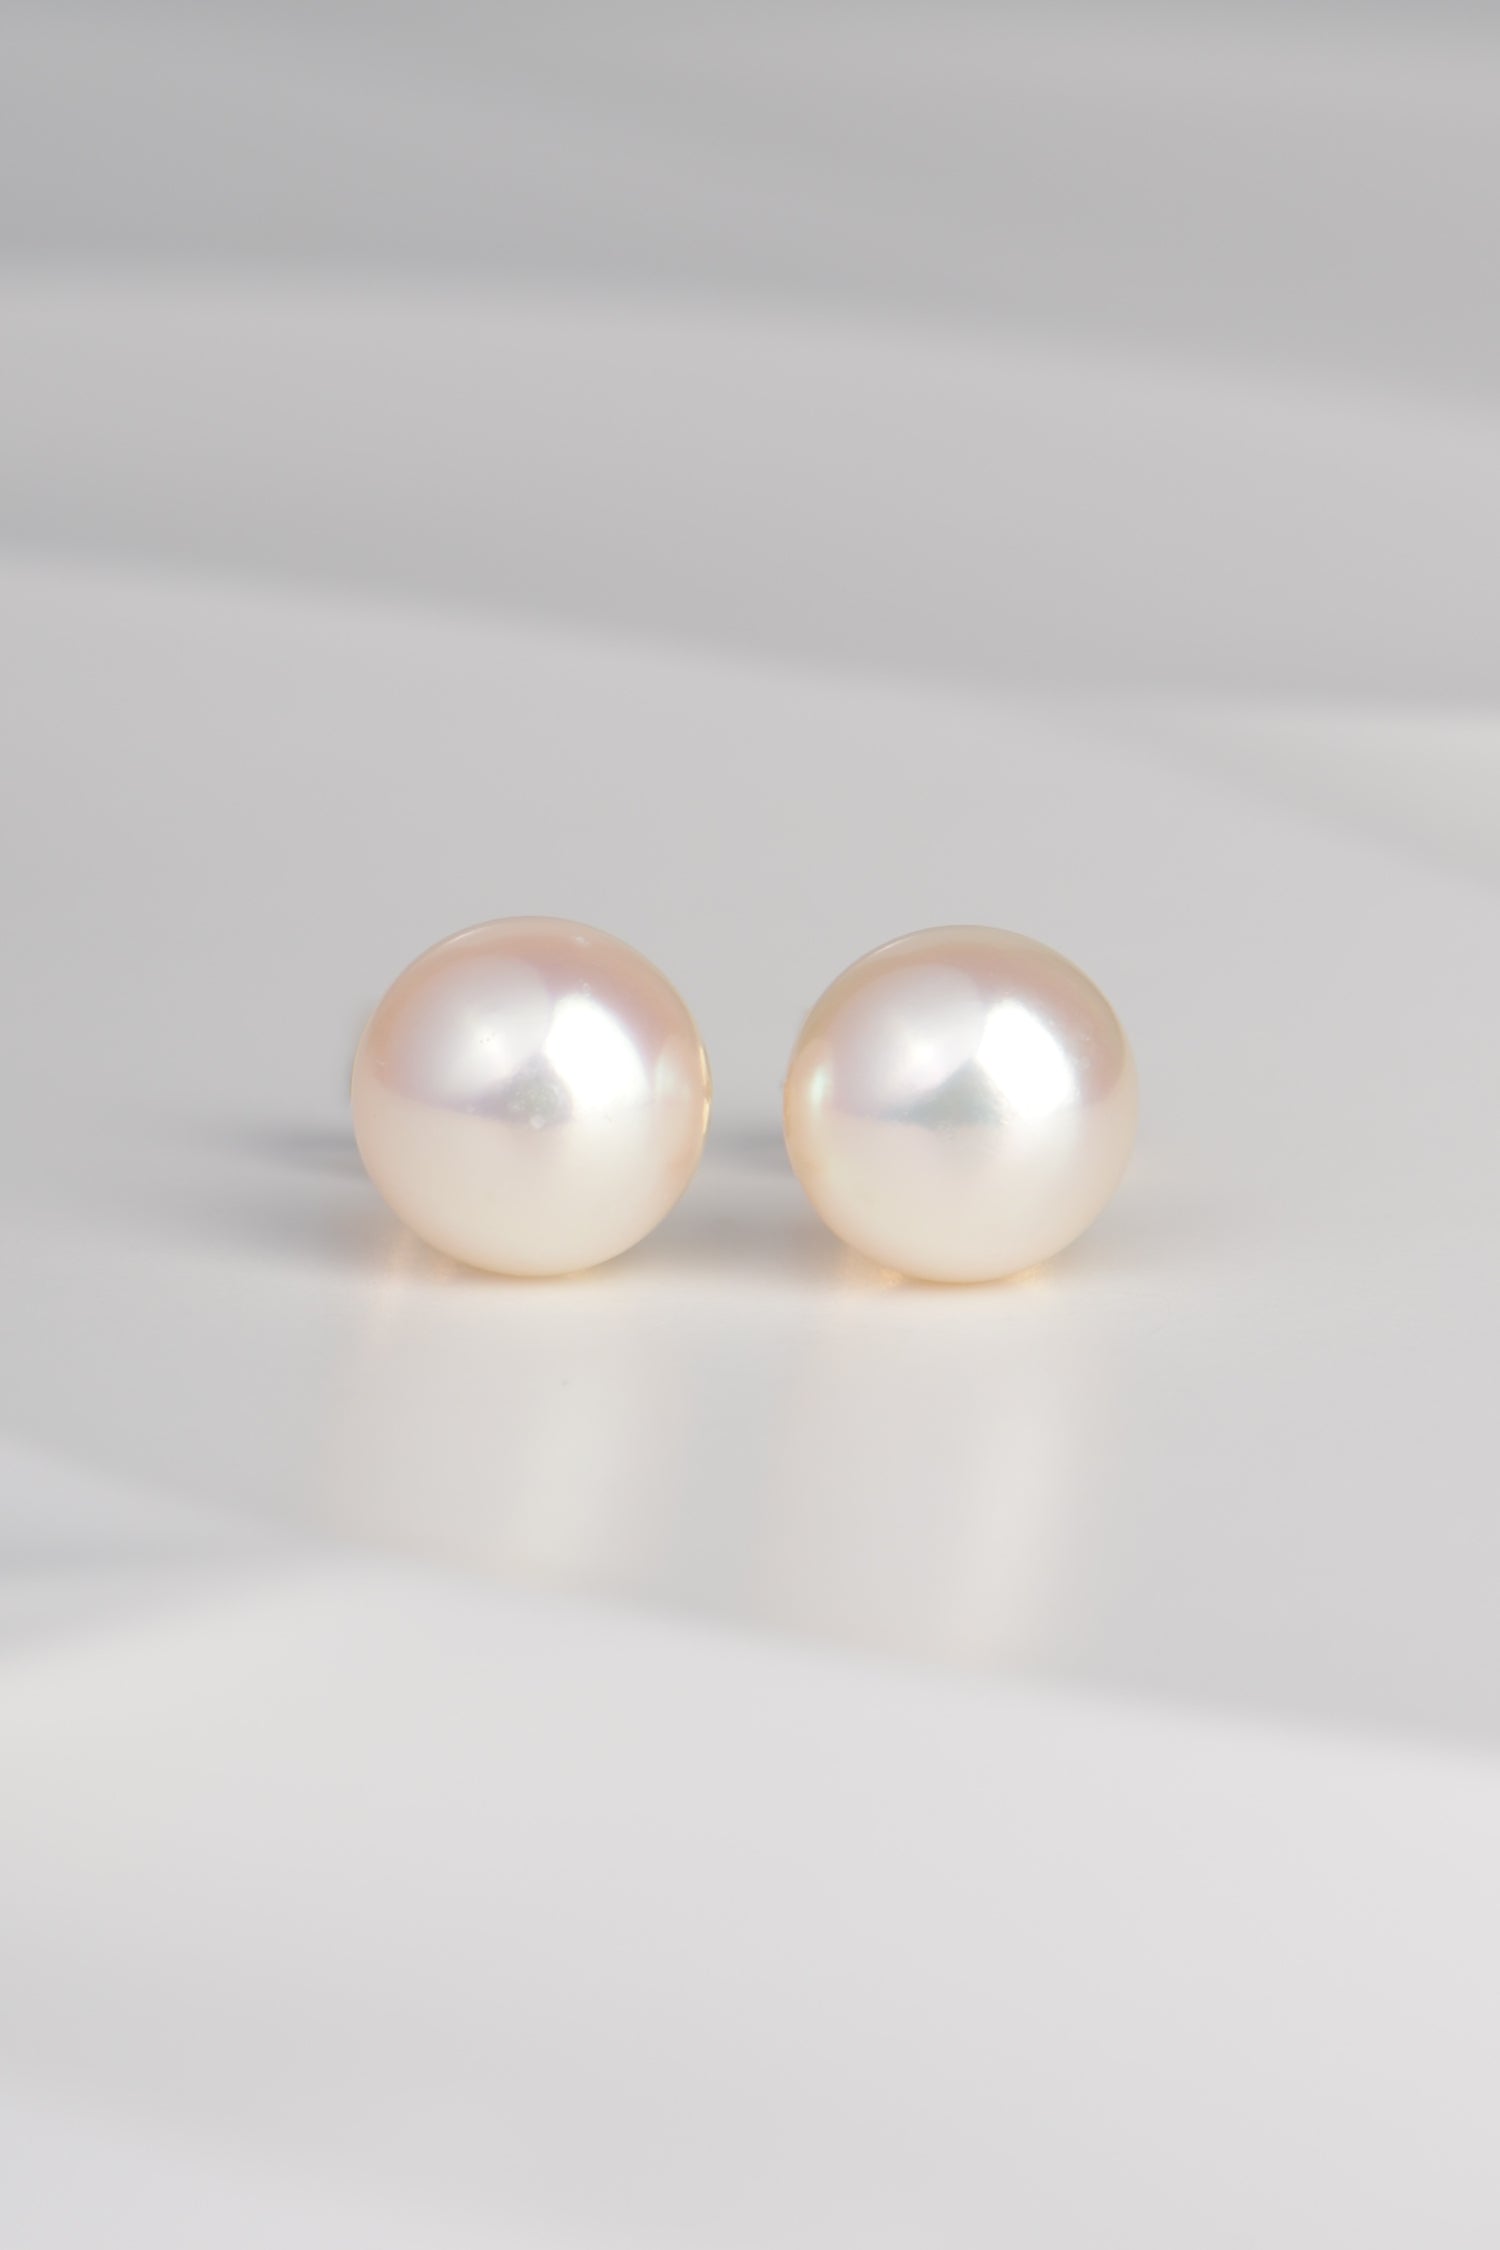 real white pearl earrings with gold fittings